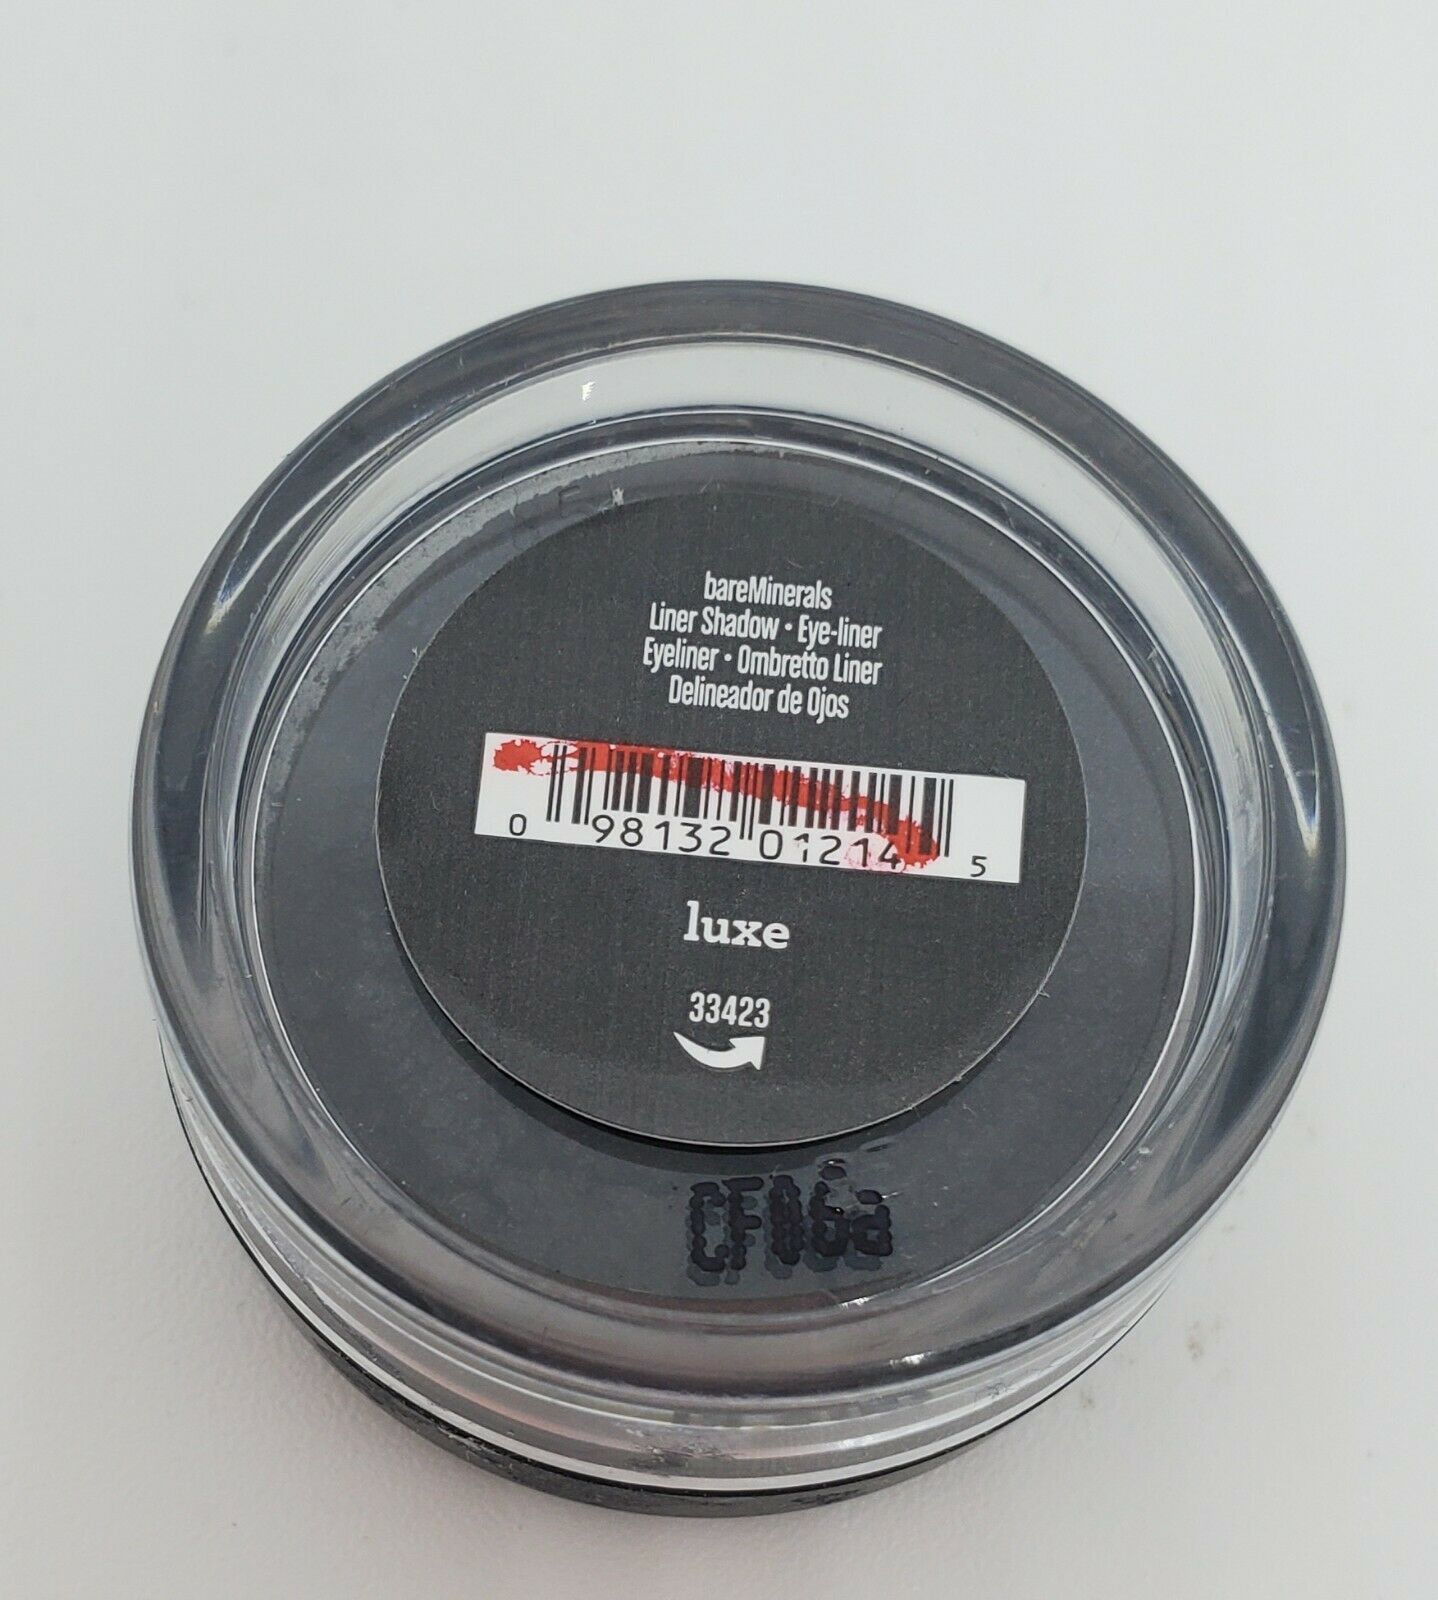 Primary image for New bareMinerals Liner Shadow Eye Liner in Luxe 33423 .57g Loose Powder